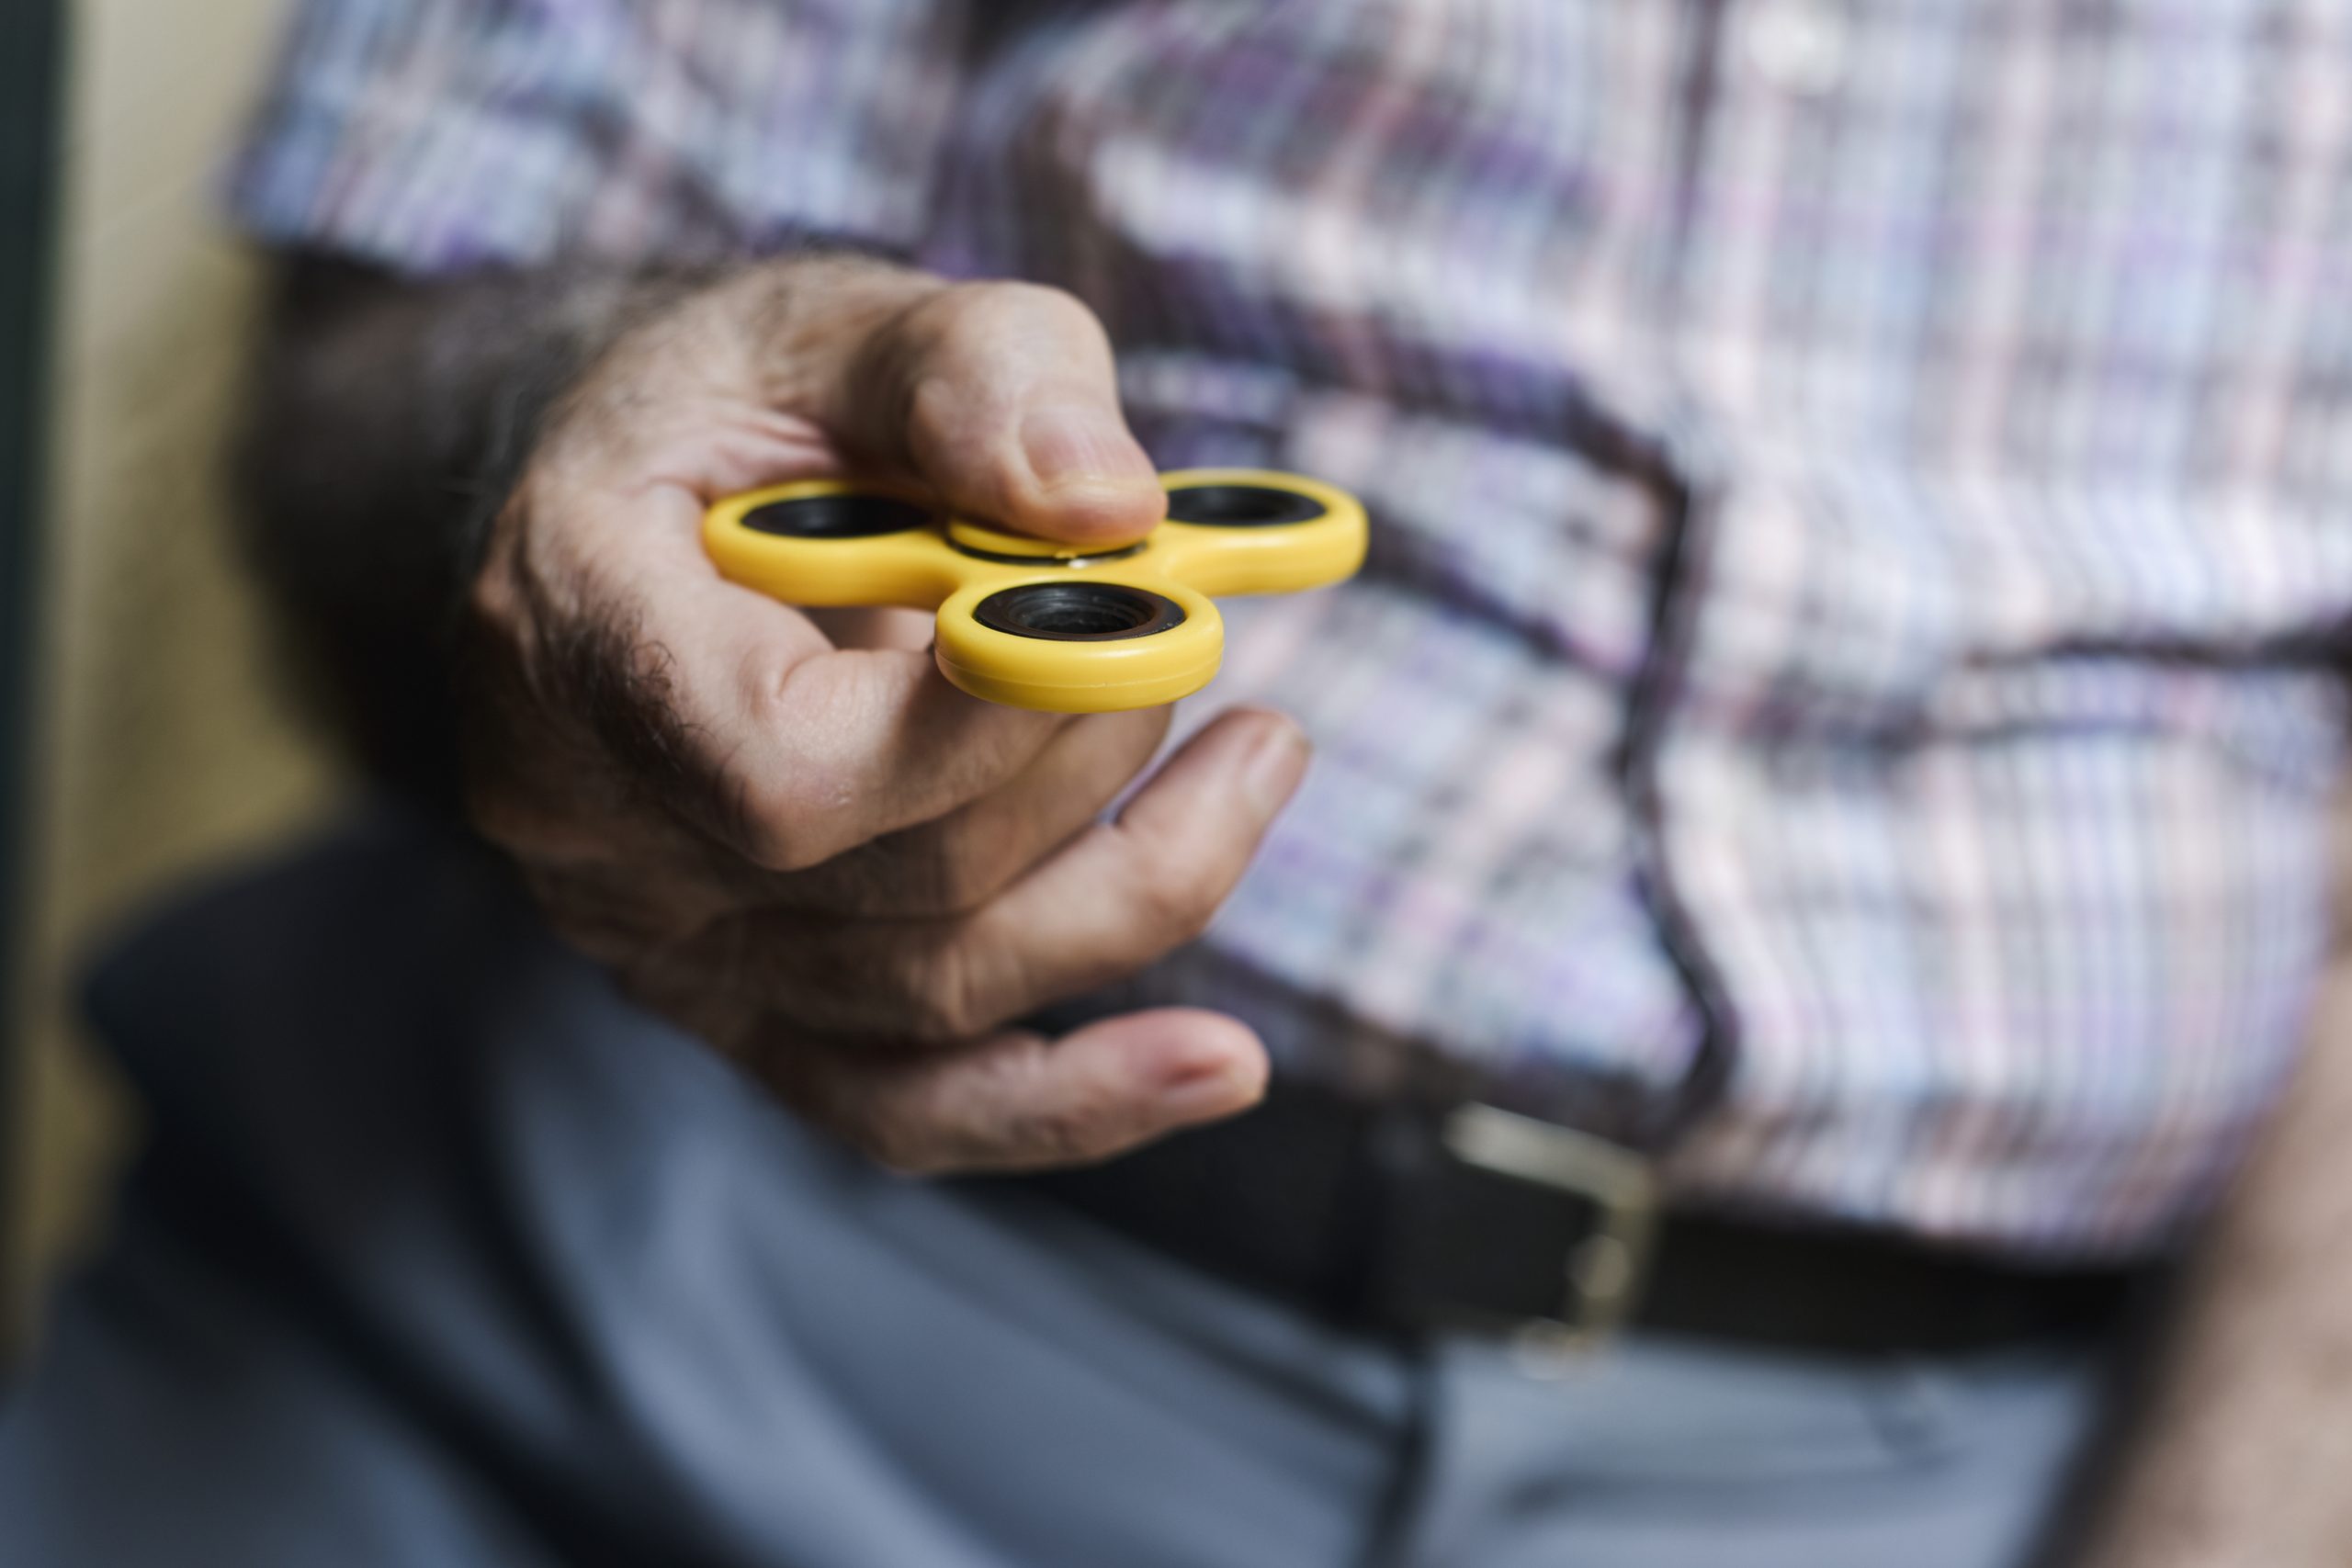 What Are Fidget Spinners? An FAQ for the Olds